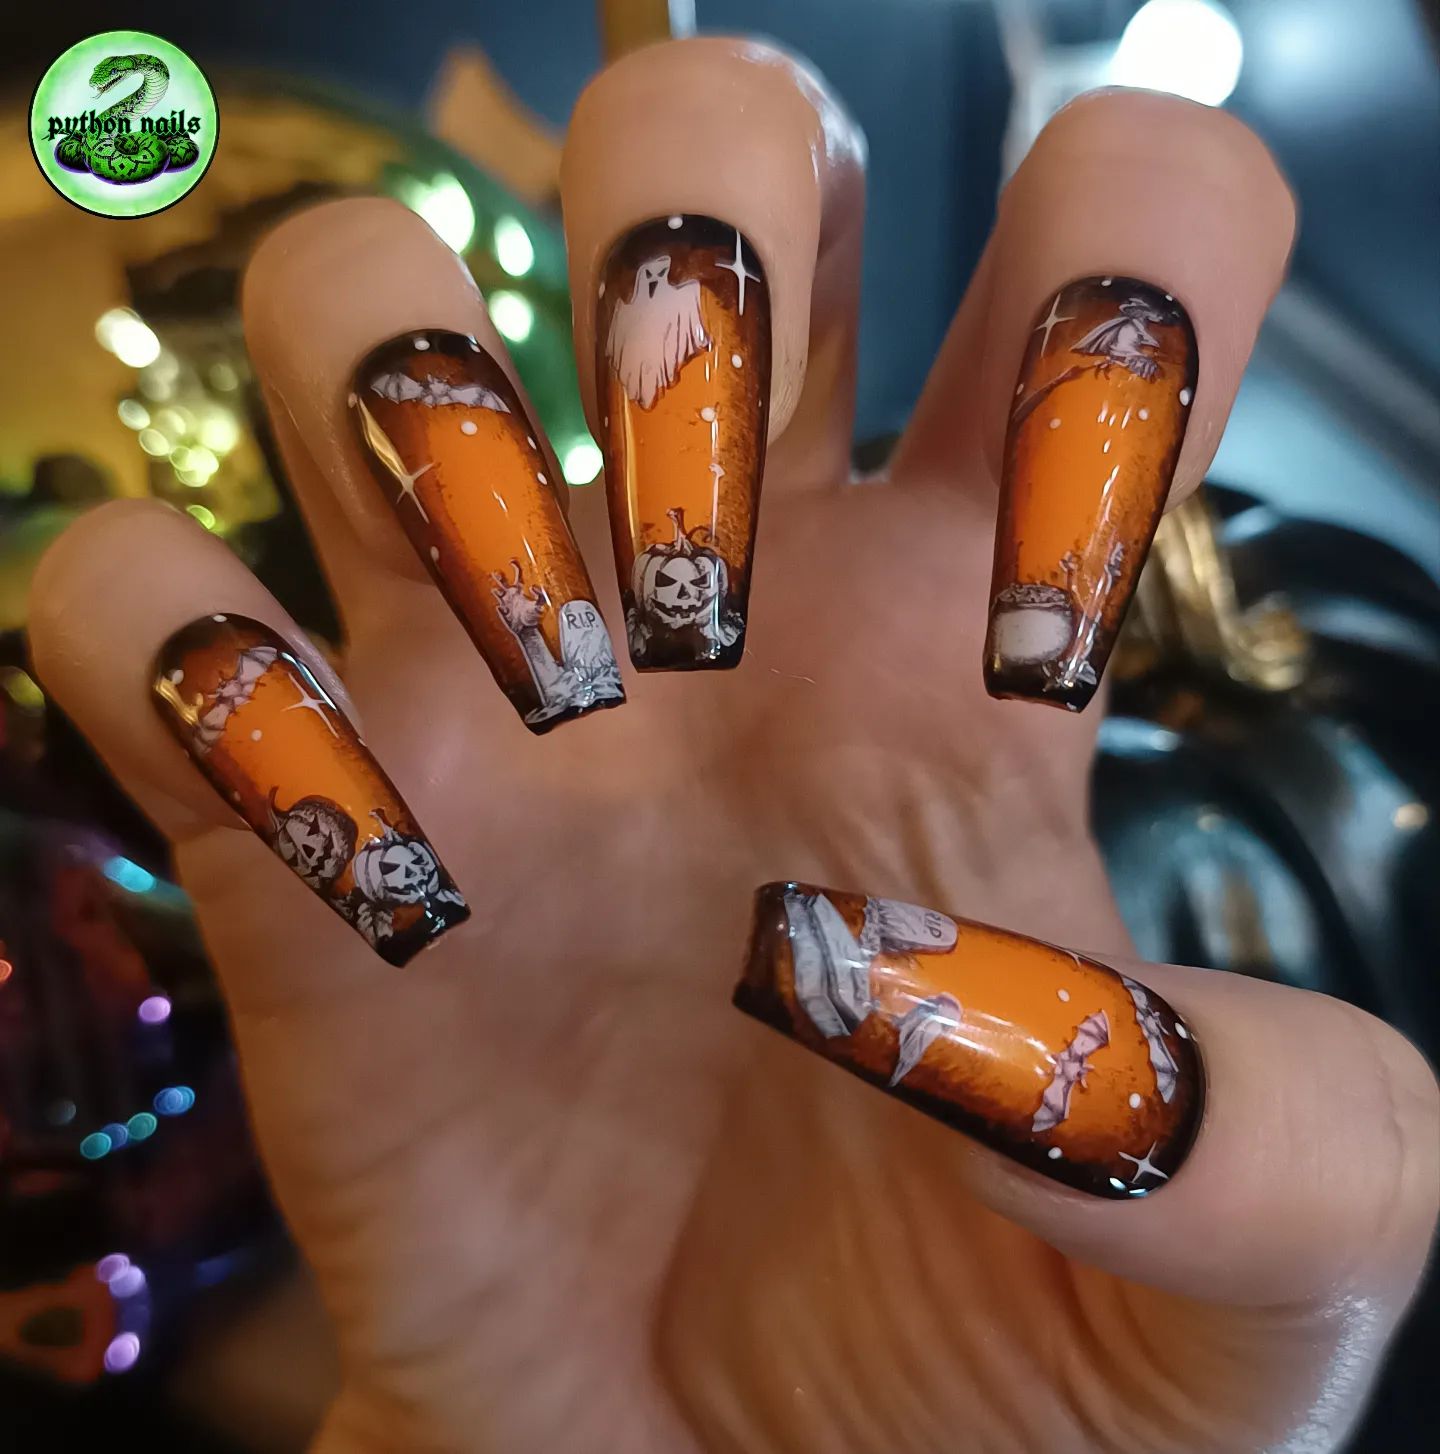 If you wanna make your orange nails pop, why don't you try black framing on these? In this way, you will achieve a unique look and everyone will realize your Halloween nails! Scary details on the nails are perfect for this spooky day, too.